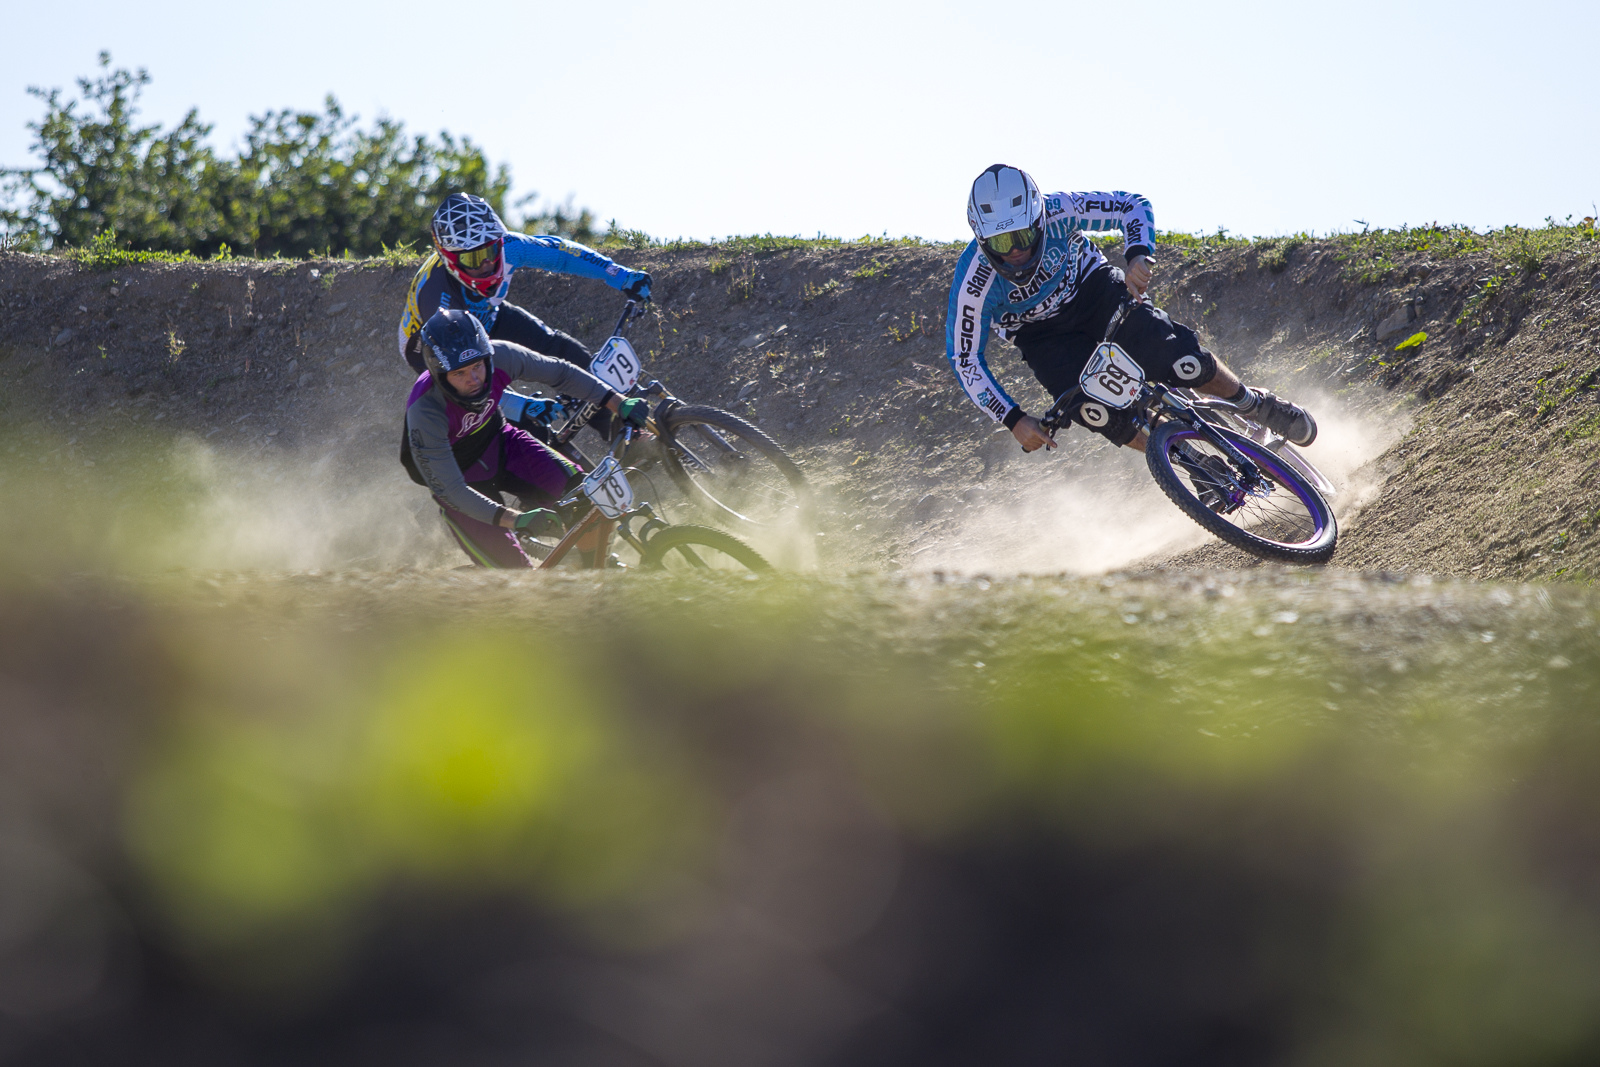 during round 4 of The Schwalbe British 4X Series at Pennines Farm, Falmouth, United Kingdom. 8August,2015 Photo: Charles Robertson